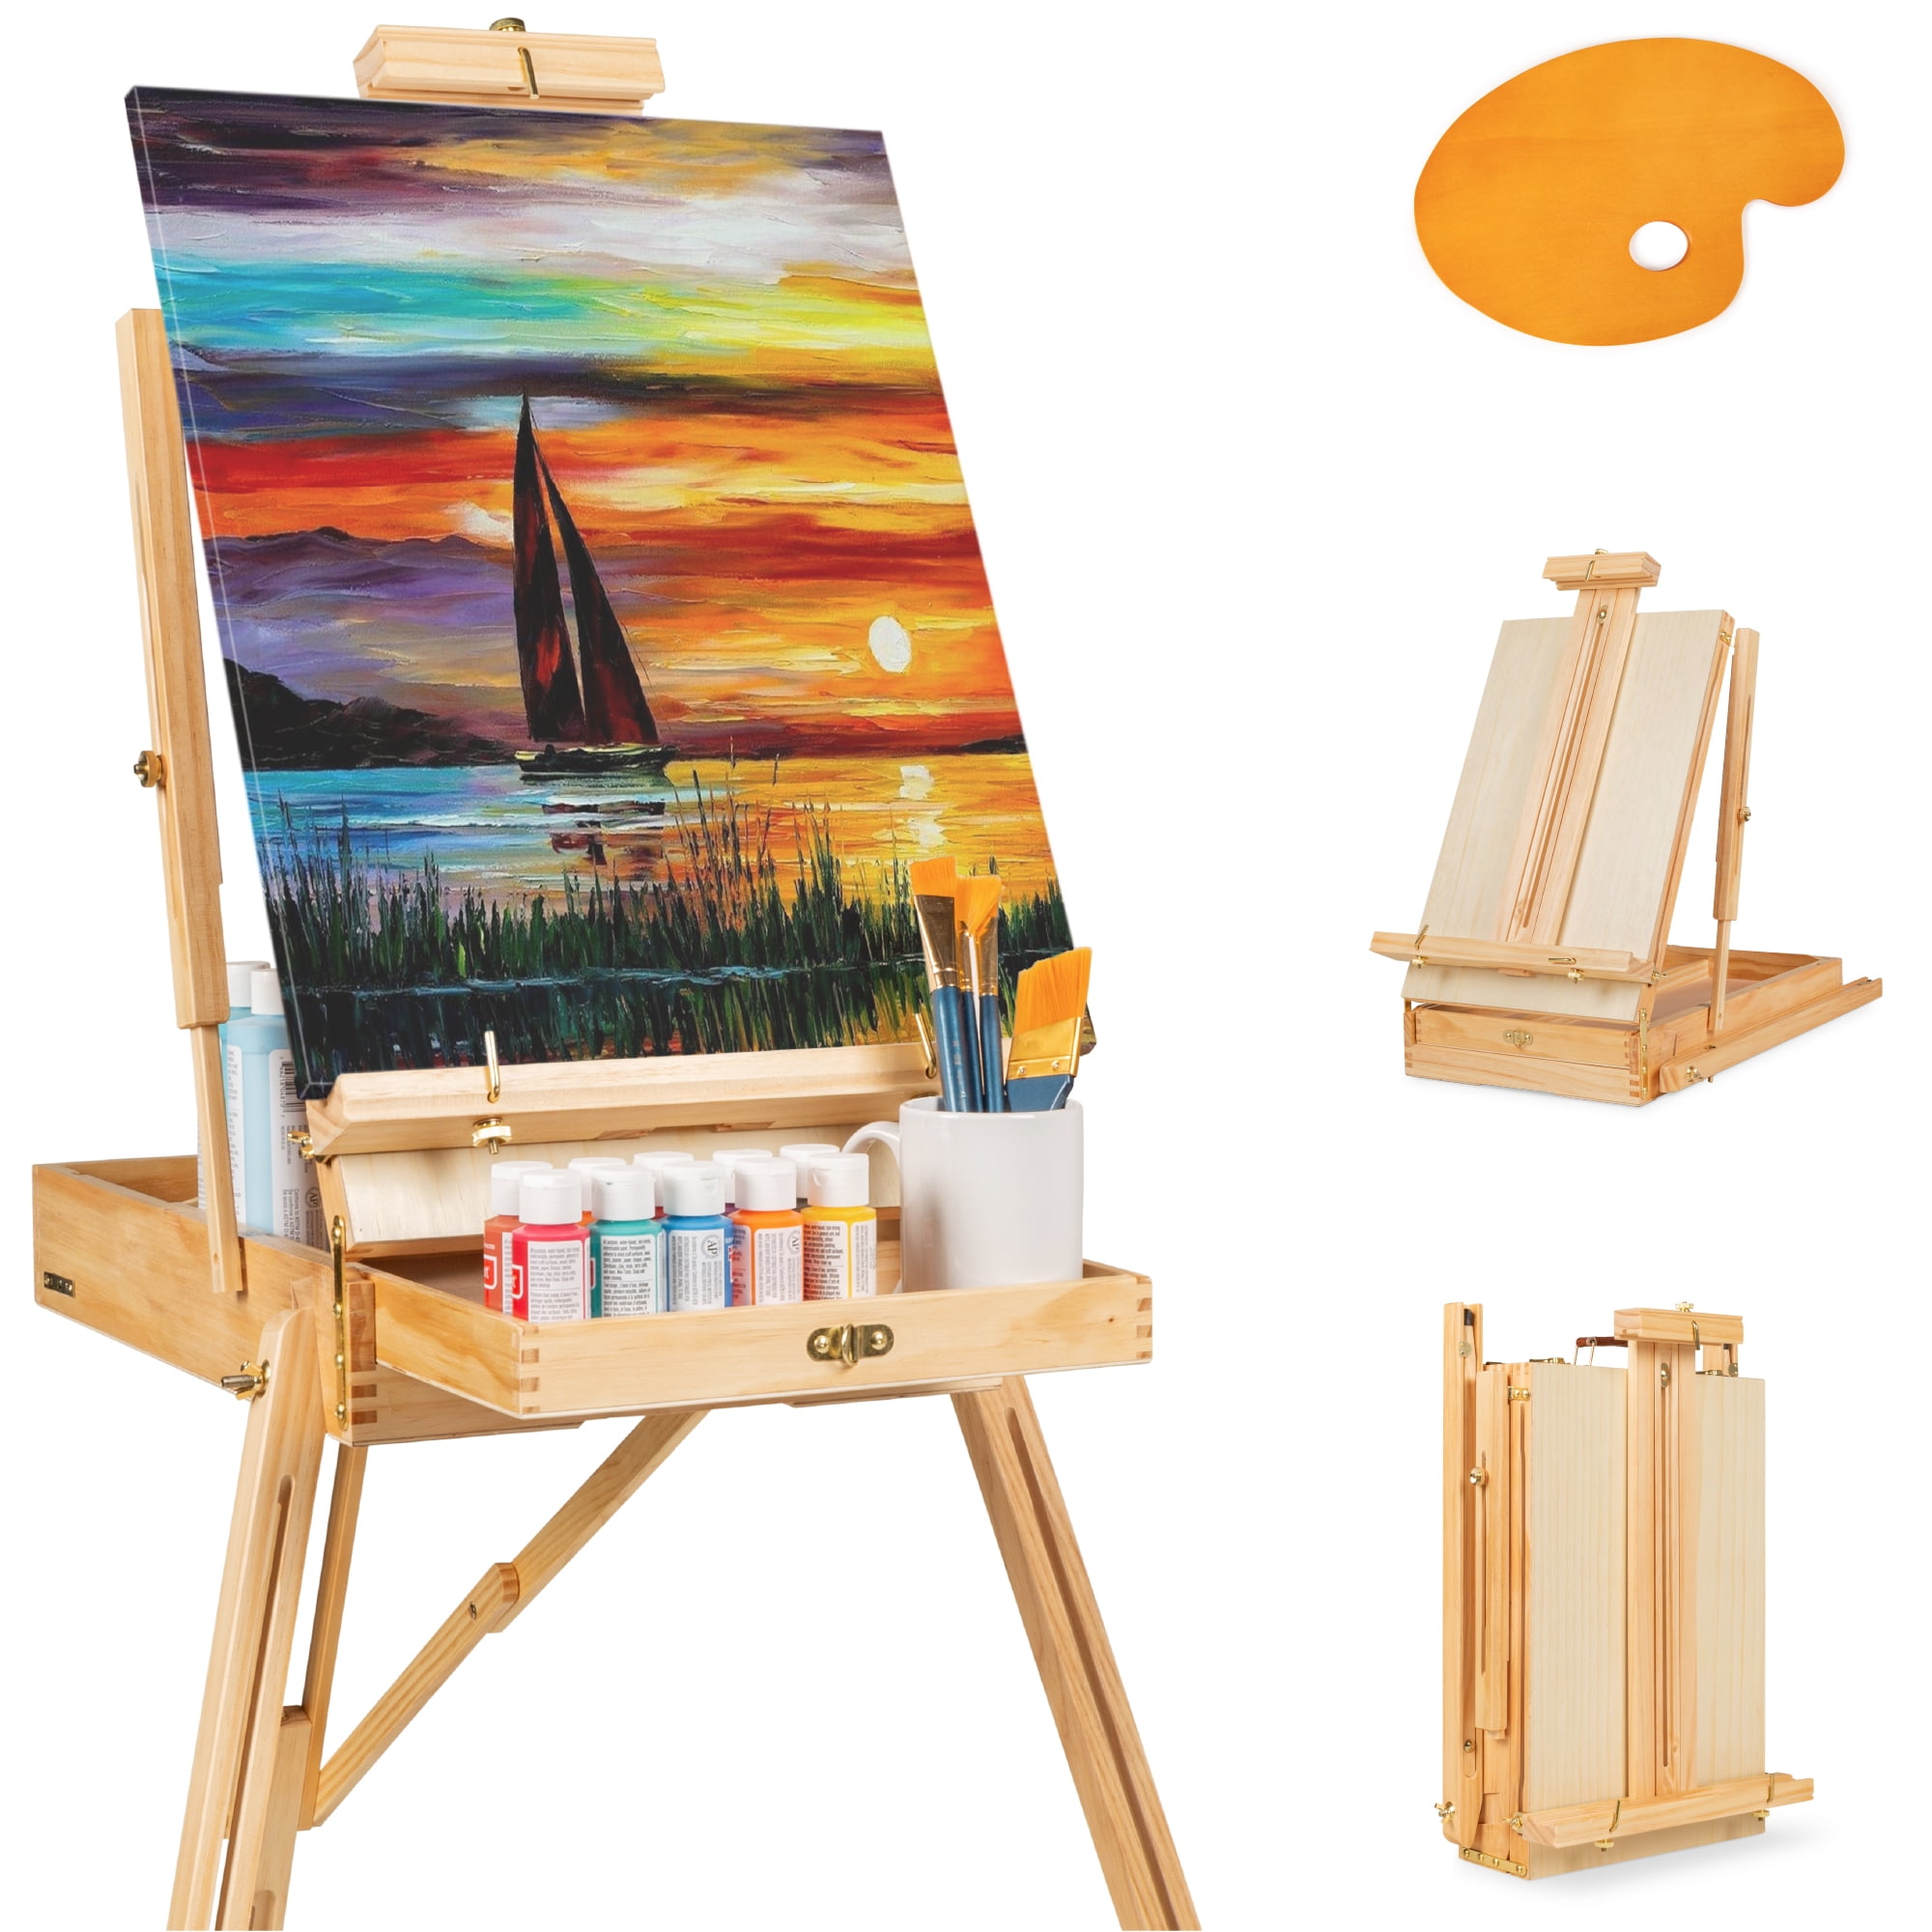 Wooden Pallete and Shoulder Strap HJ01-Q-UK1 Portable Art Easel for Painting QINUKER French Style Wooden Artist Easel & Sketchbox with Drawer